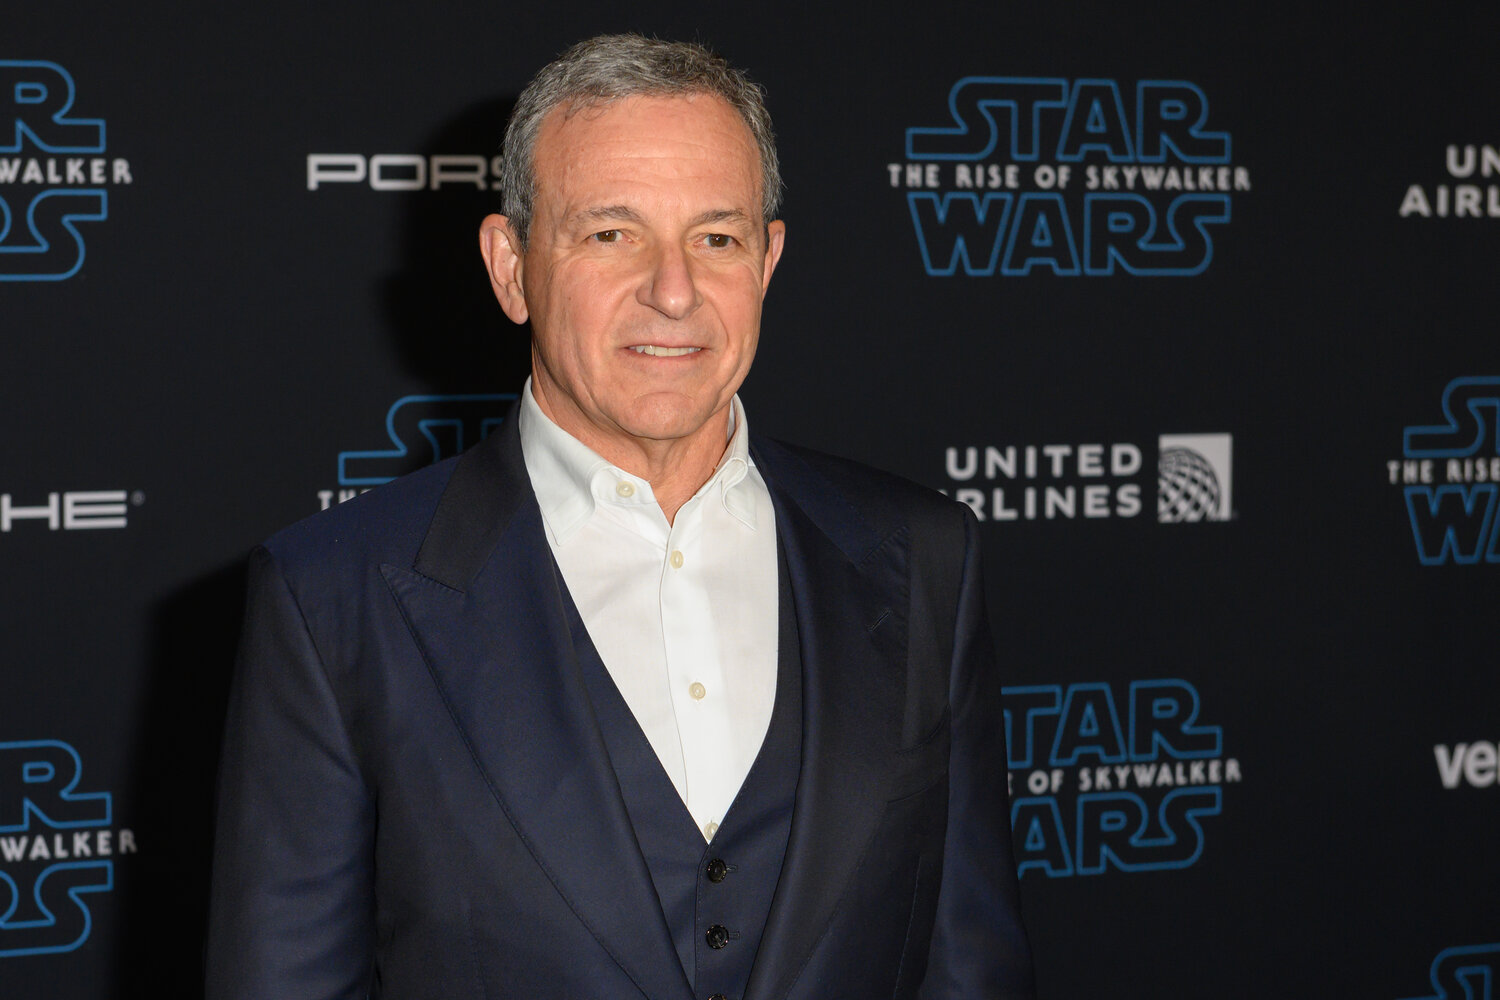 Iger Threatens to Pull Investments, New Jobs from Florida